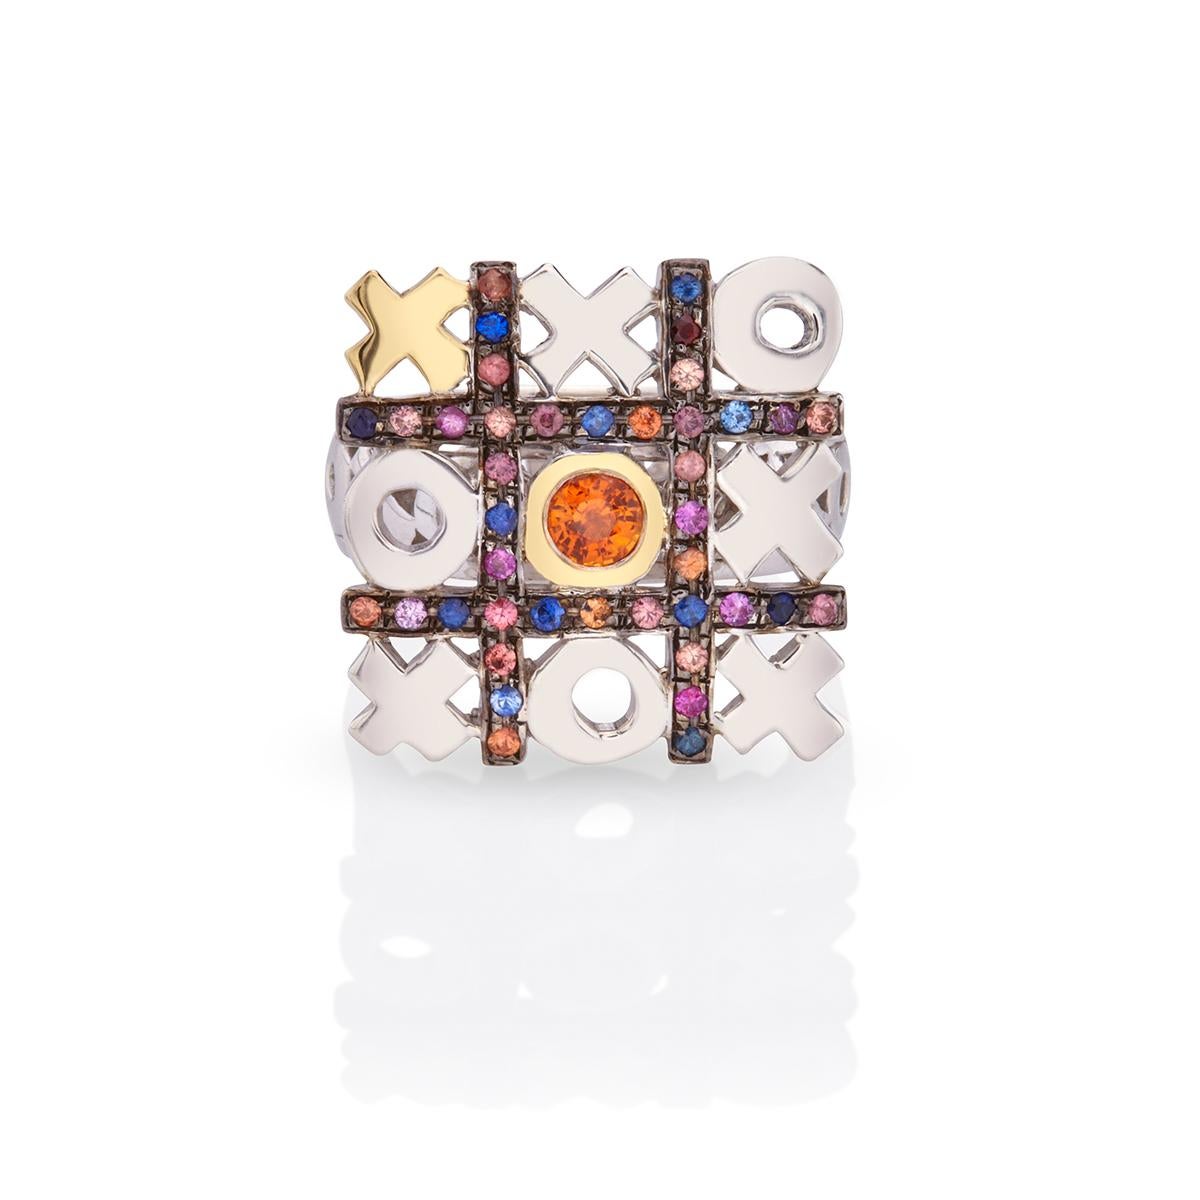 One of a kind Sterling Silver and 18kt Gold multi-colour Sapphire Tic-Tac-Toe Ring by Nicofilimon.
This gorgeous ring is handcrafted out of 925 sterling silver & 18kt yellow gold and features stunning multi-coloured sapphire stones 0,60 ct. This